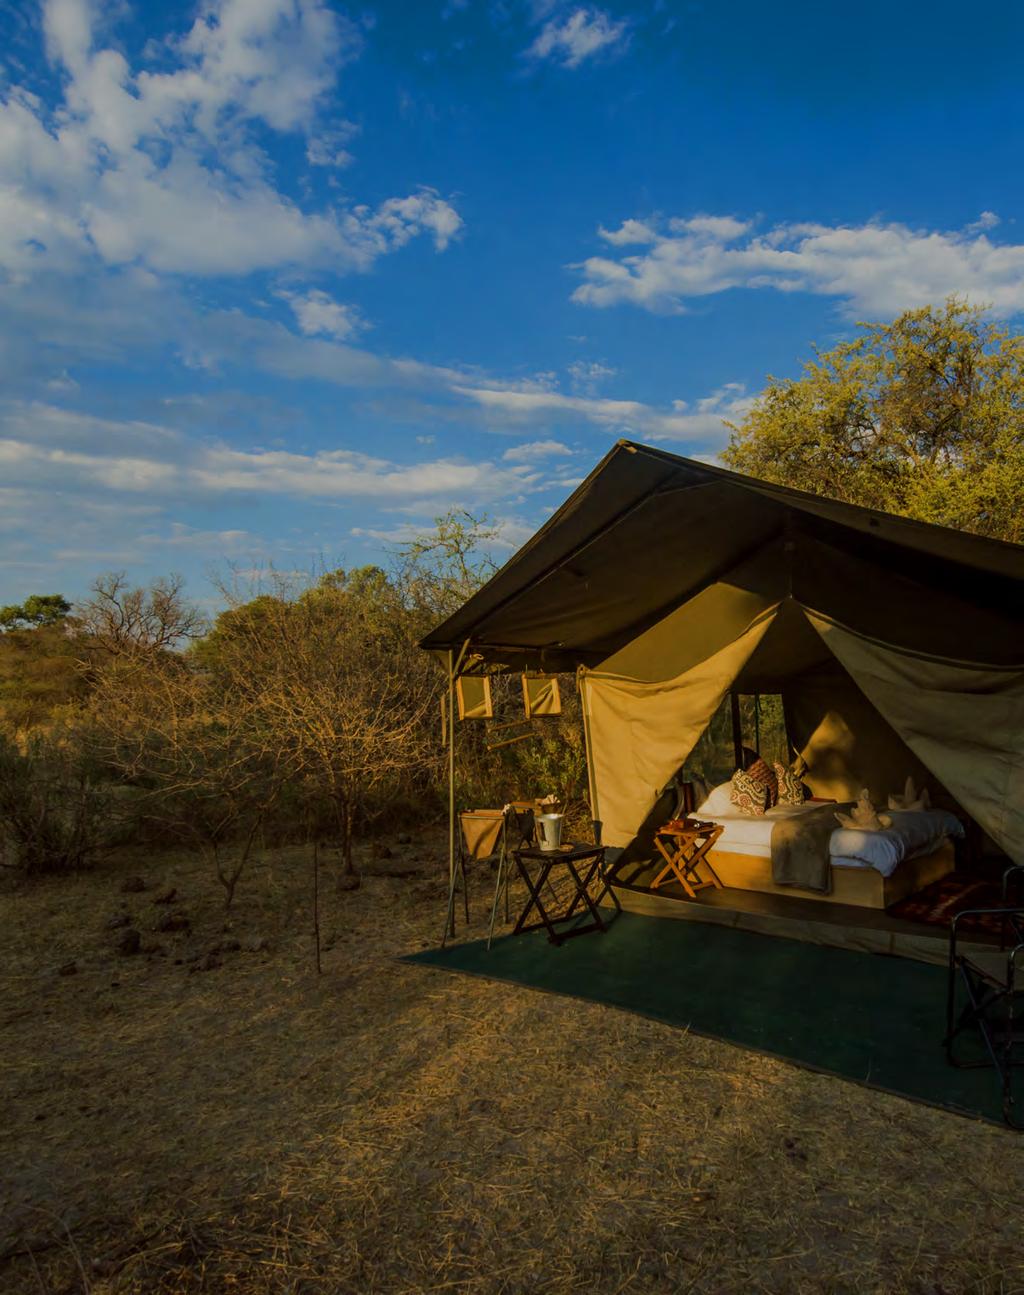 DAYS 4-7 PRIVATE MOBILE CAMP MOREMI GAME RESERVE DAYS 4-7 Private Mobile Camp Capture Africa Moremi Game Reserve Wildlife viewing Get your checklist ready Baboon, Buffalo, Crocodile, Elephant,